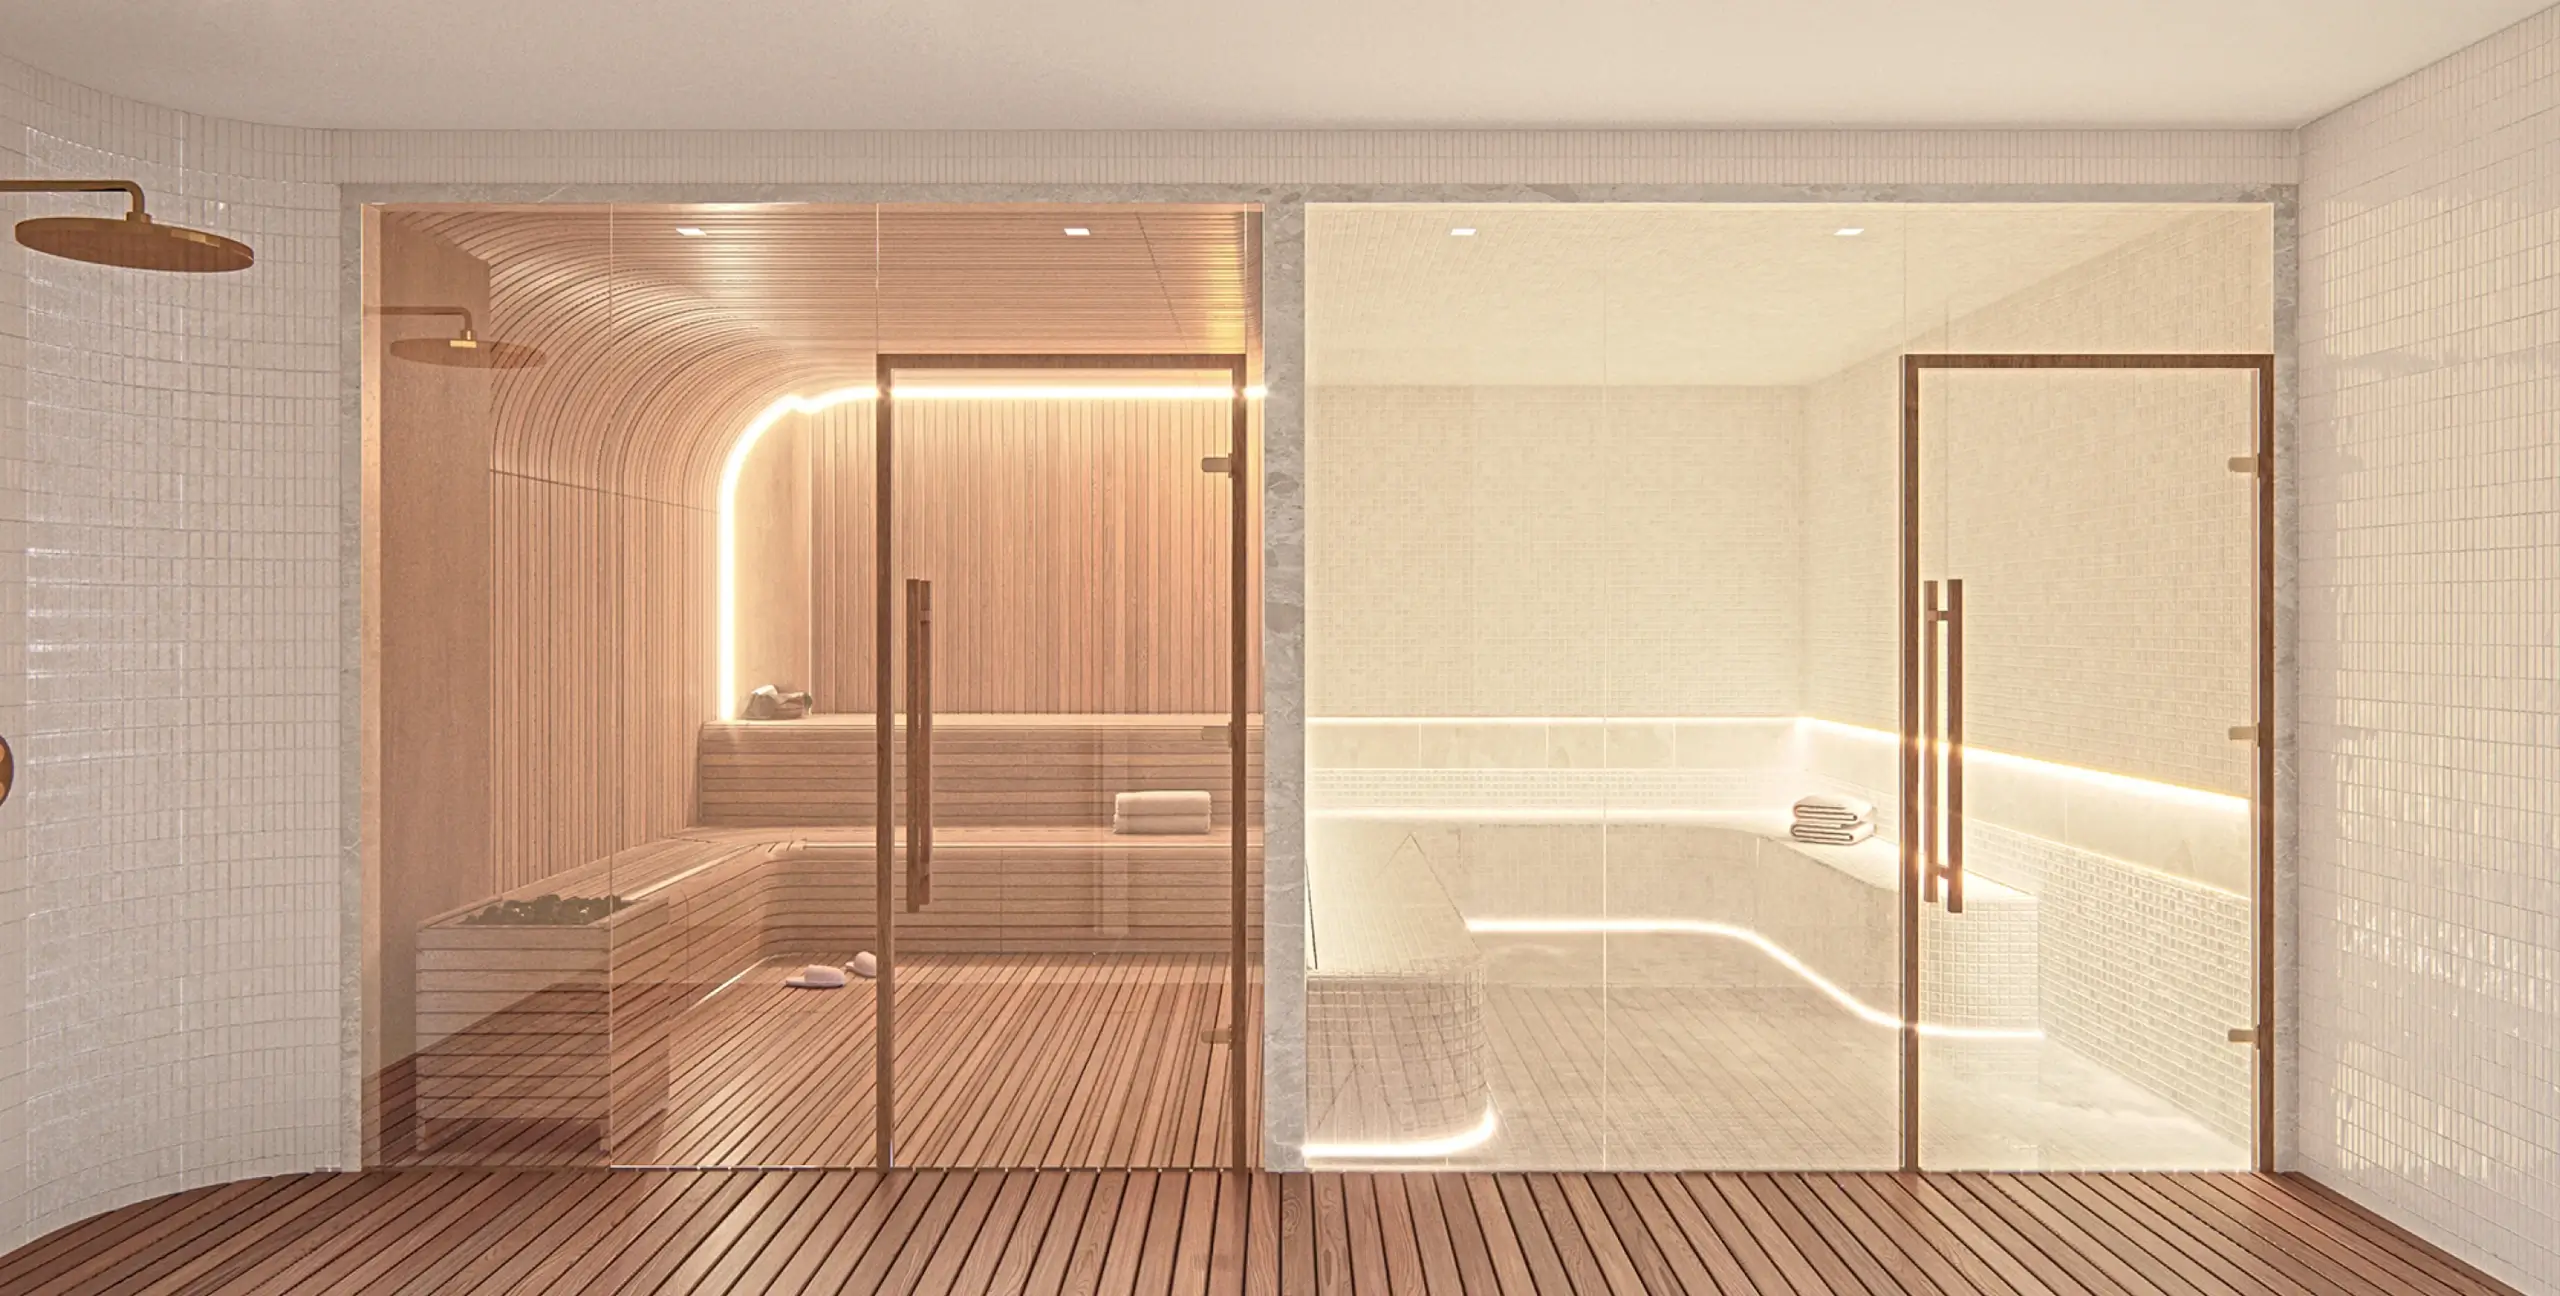 Wellness spa with sauna & steam room at Hendrix House NYC condos, providing a relaxing and luxurious amenity for residents.